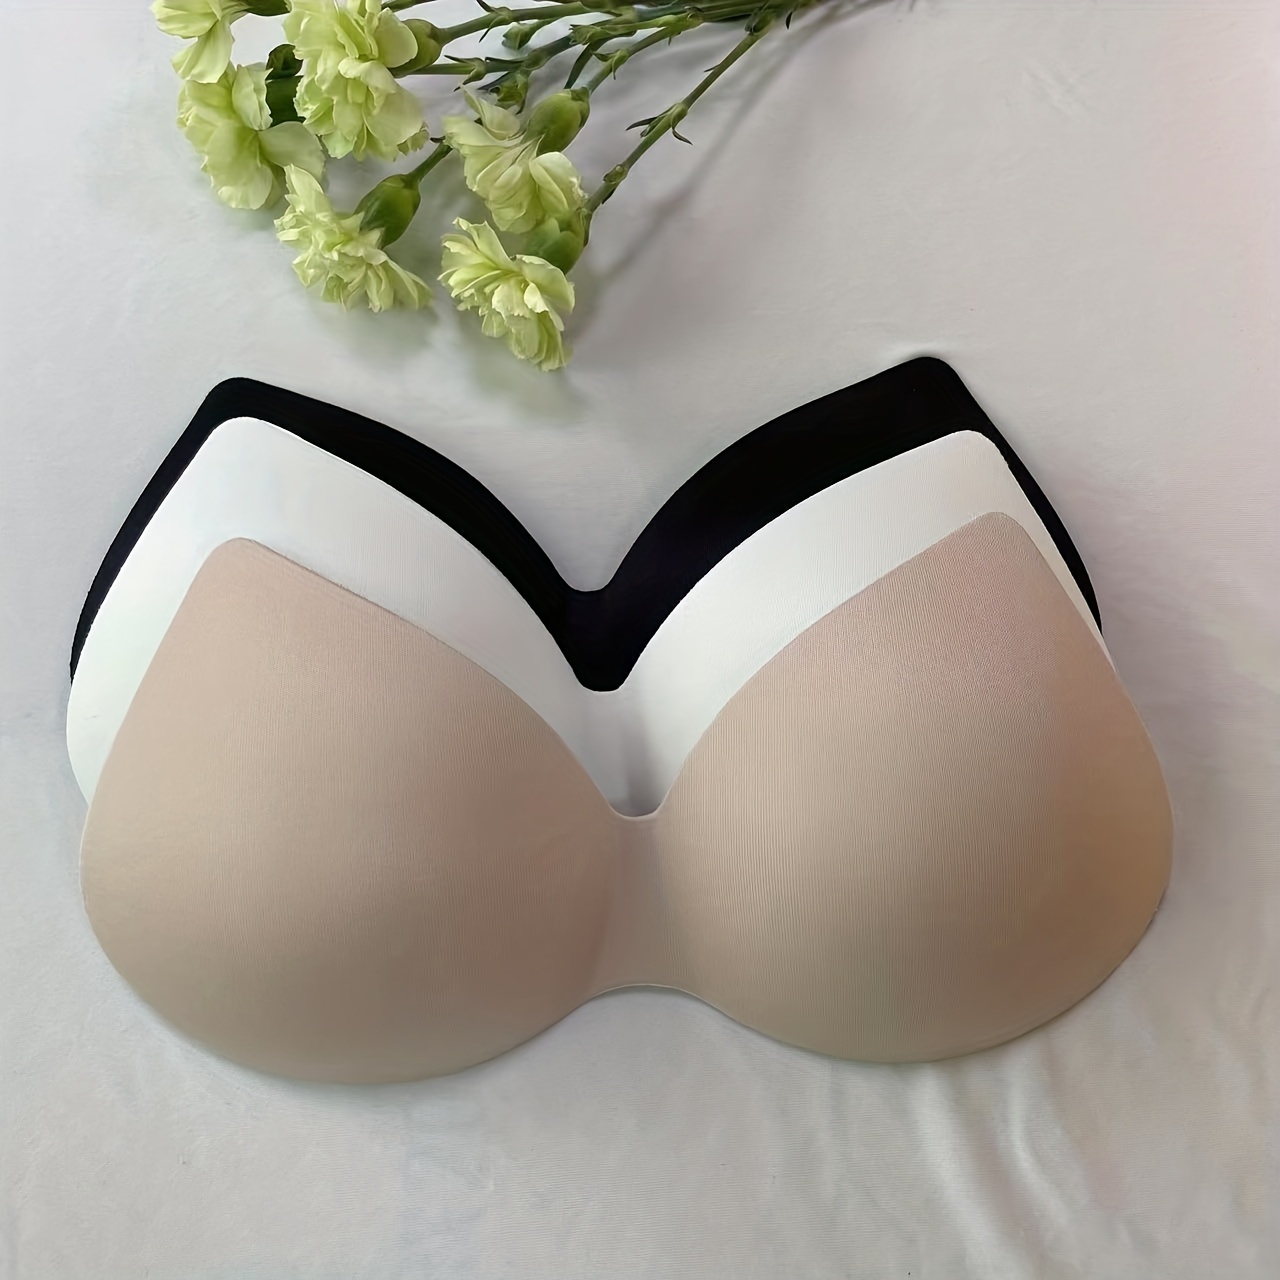 2pcs Women'S Soft Hollow Out Silicone Bra Strap Cushions With